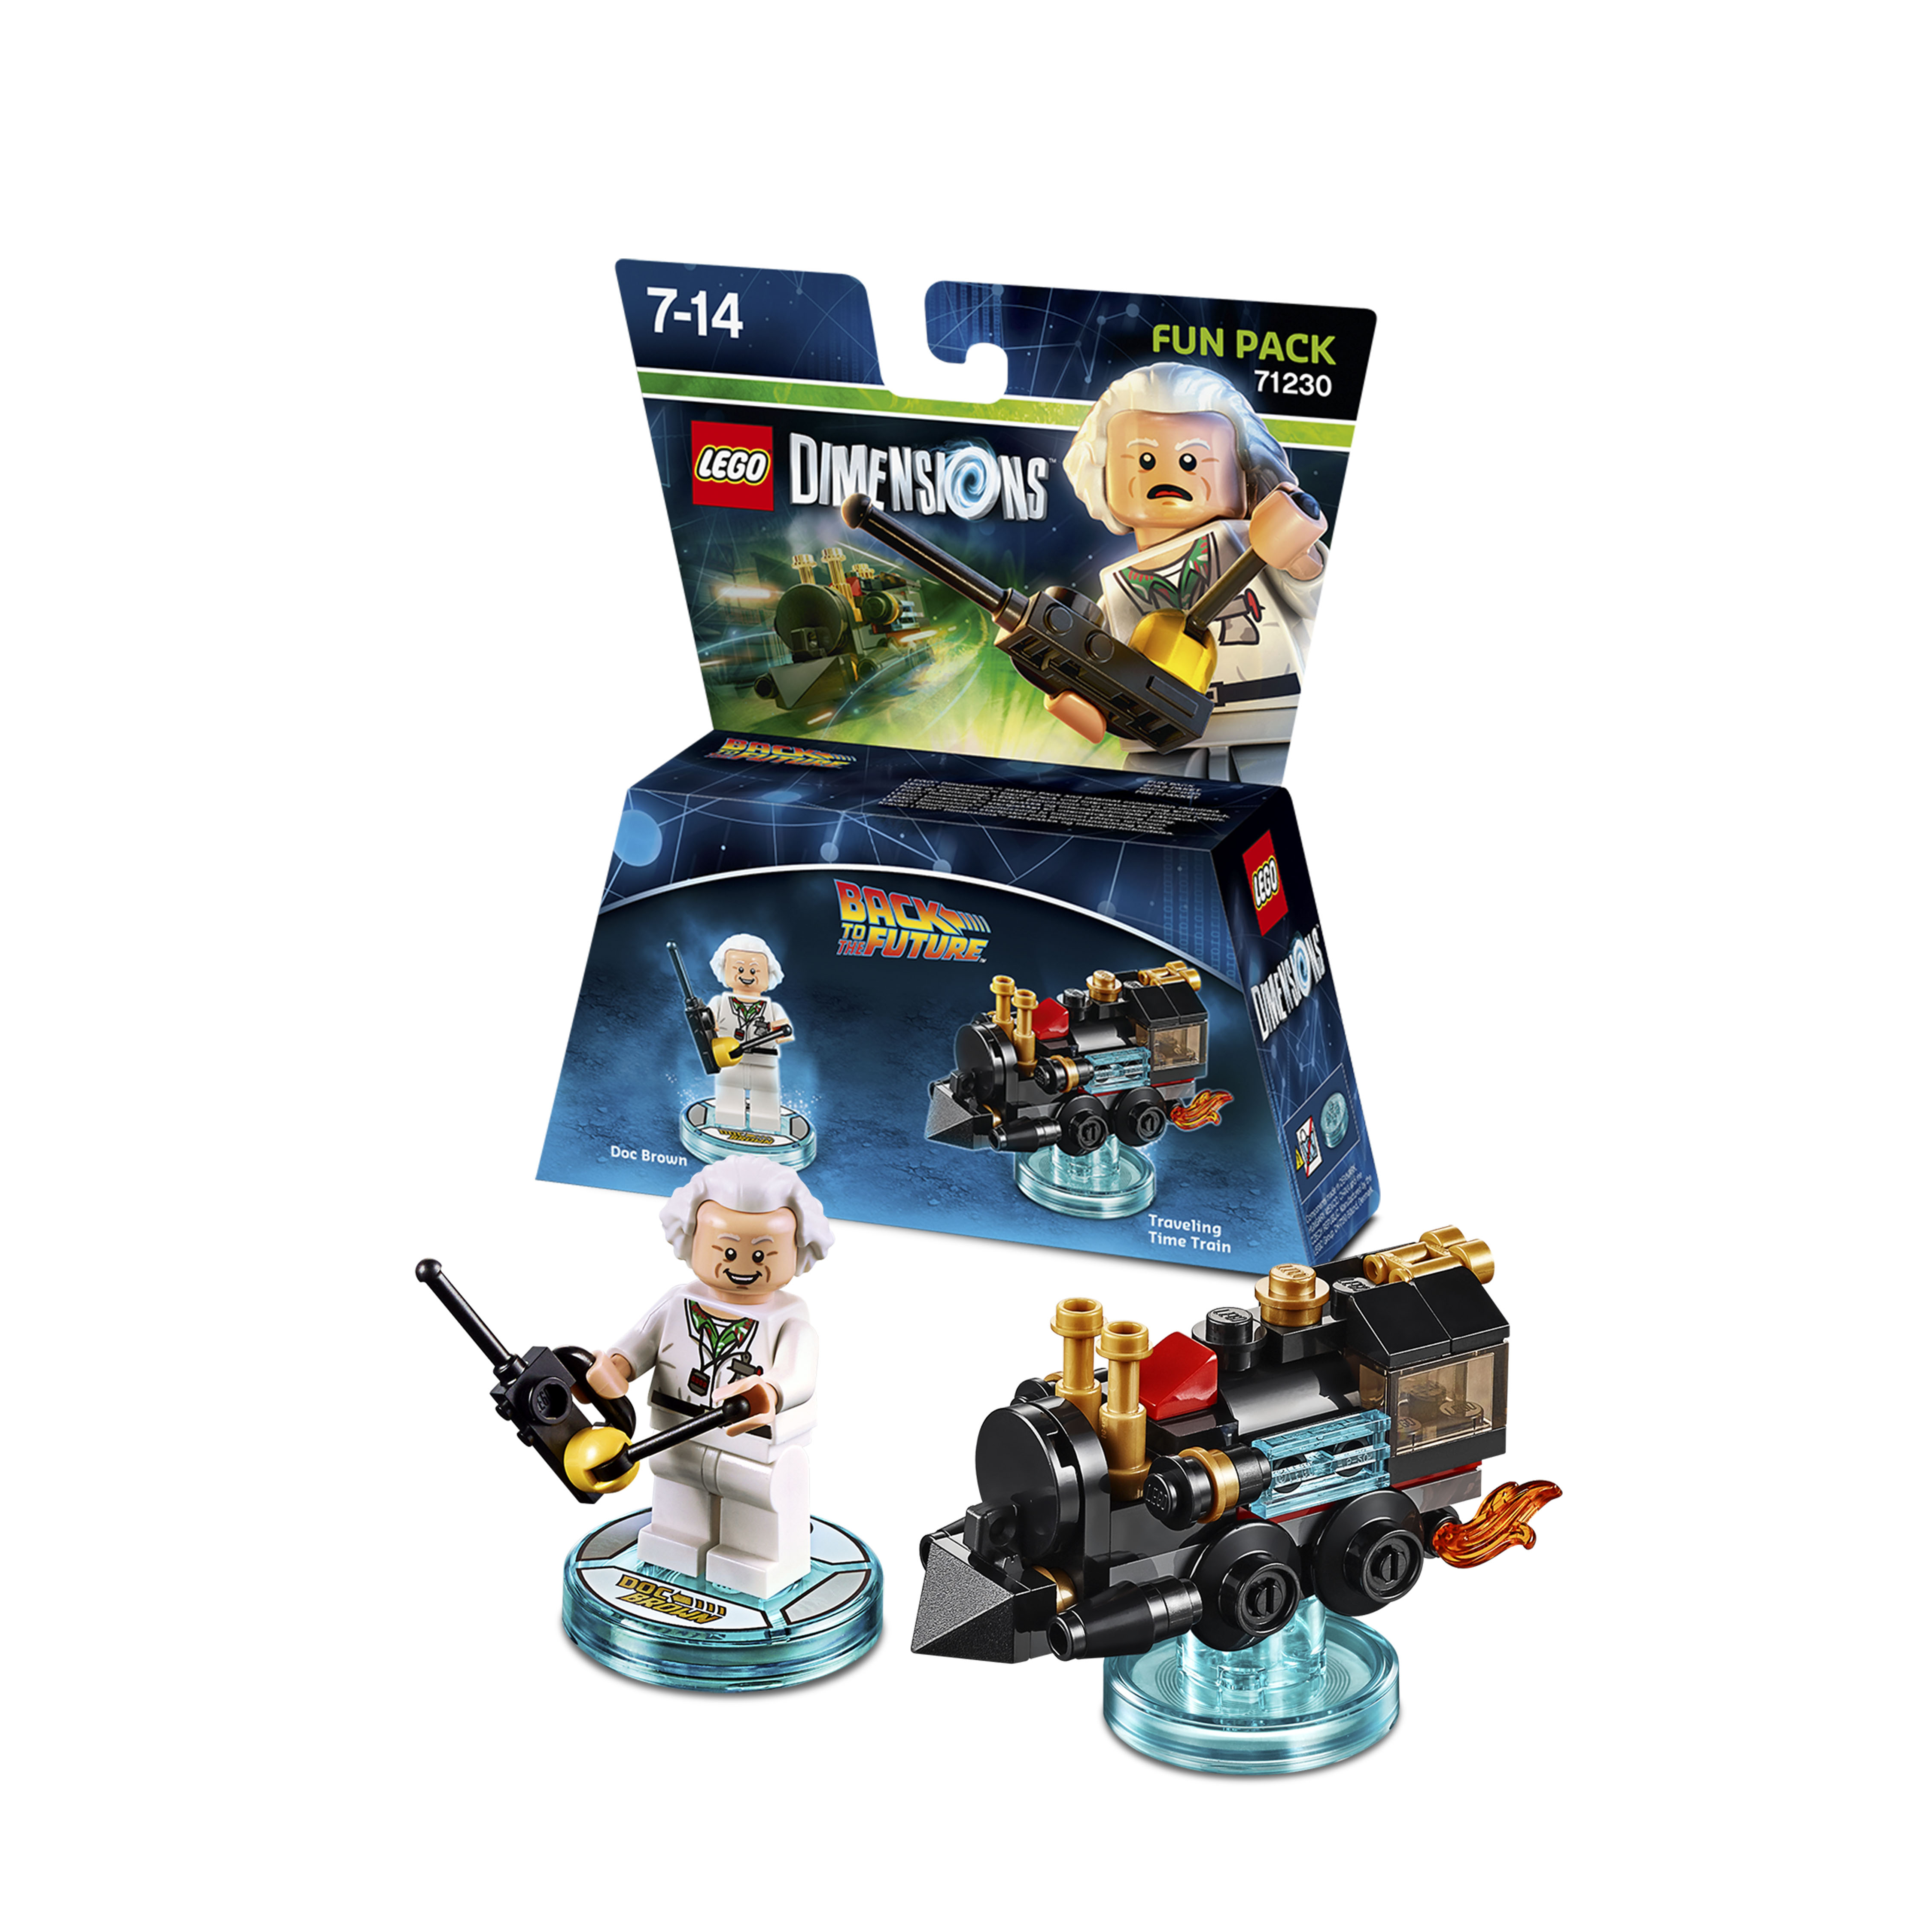 Lego Dimensions trailer adds Doc Brown to the line-up